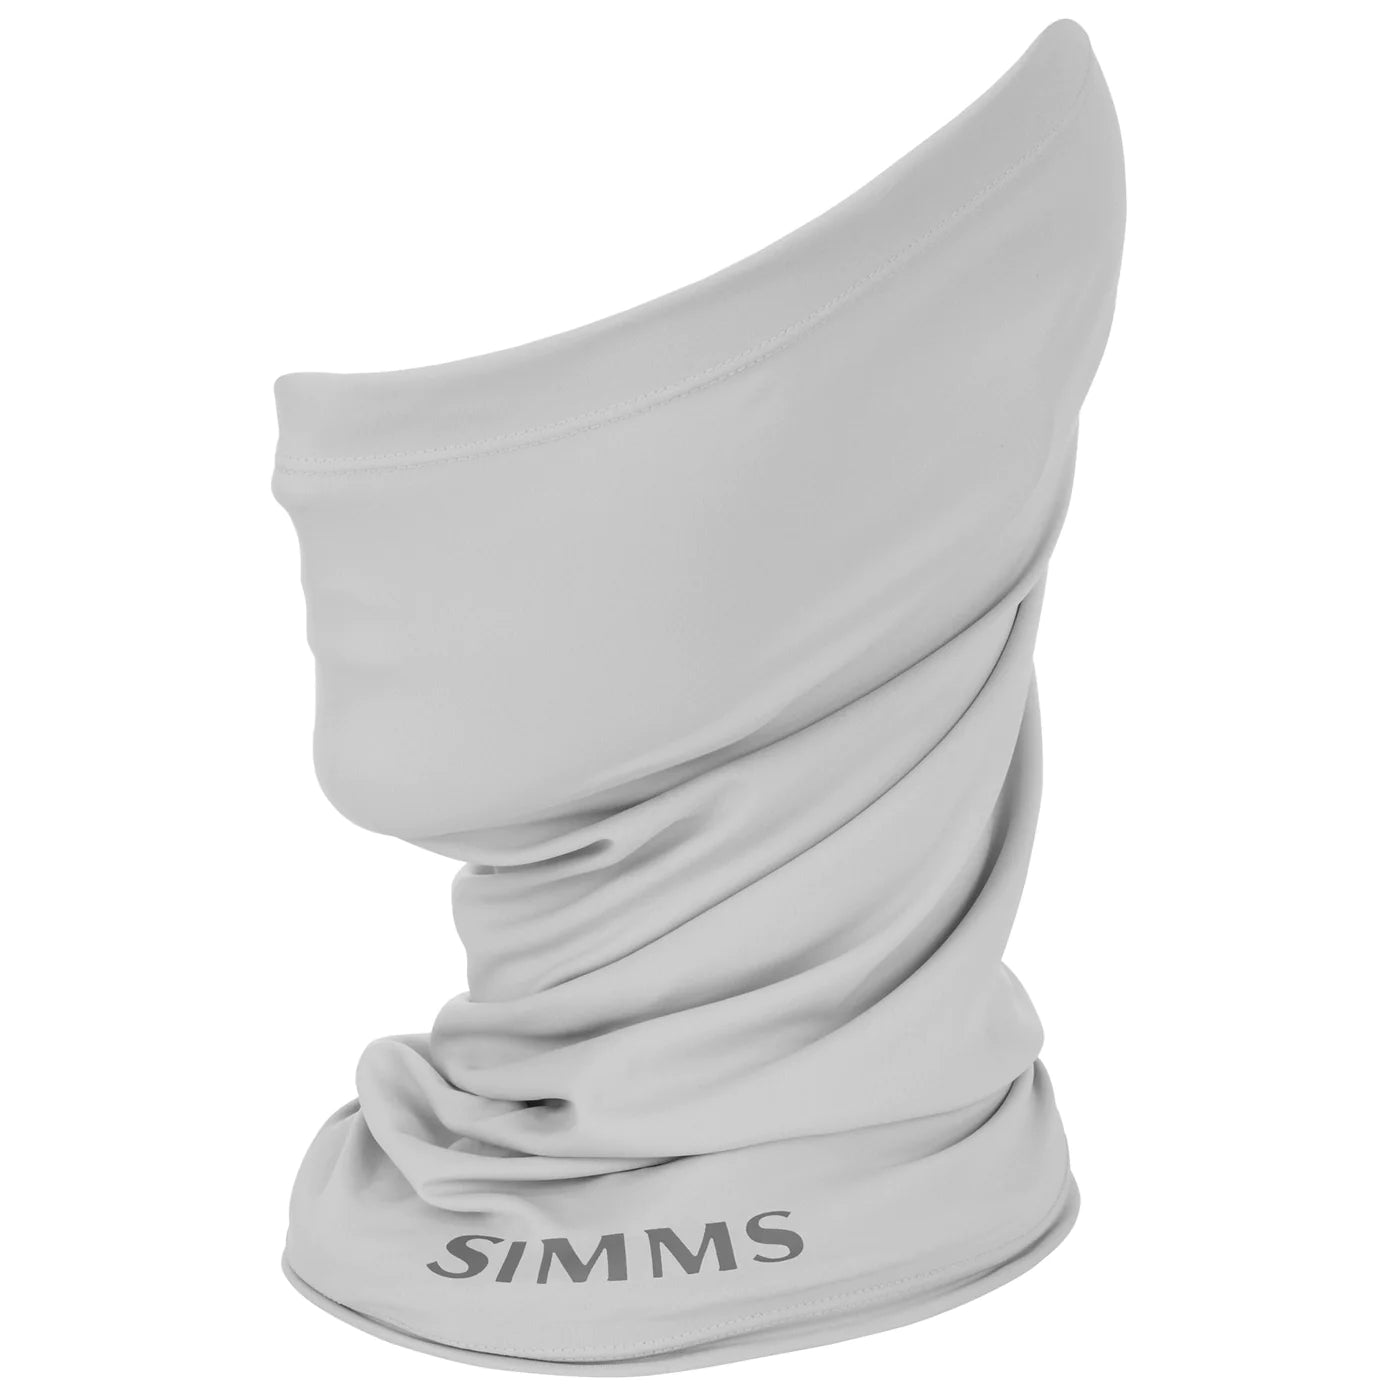 SIMMS SIMPLE FLY FISHING GAITER